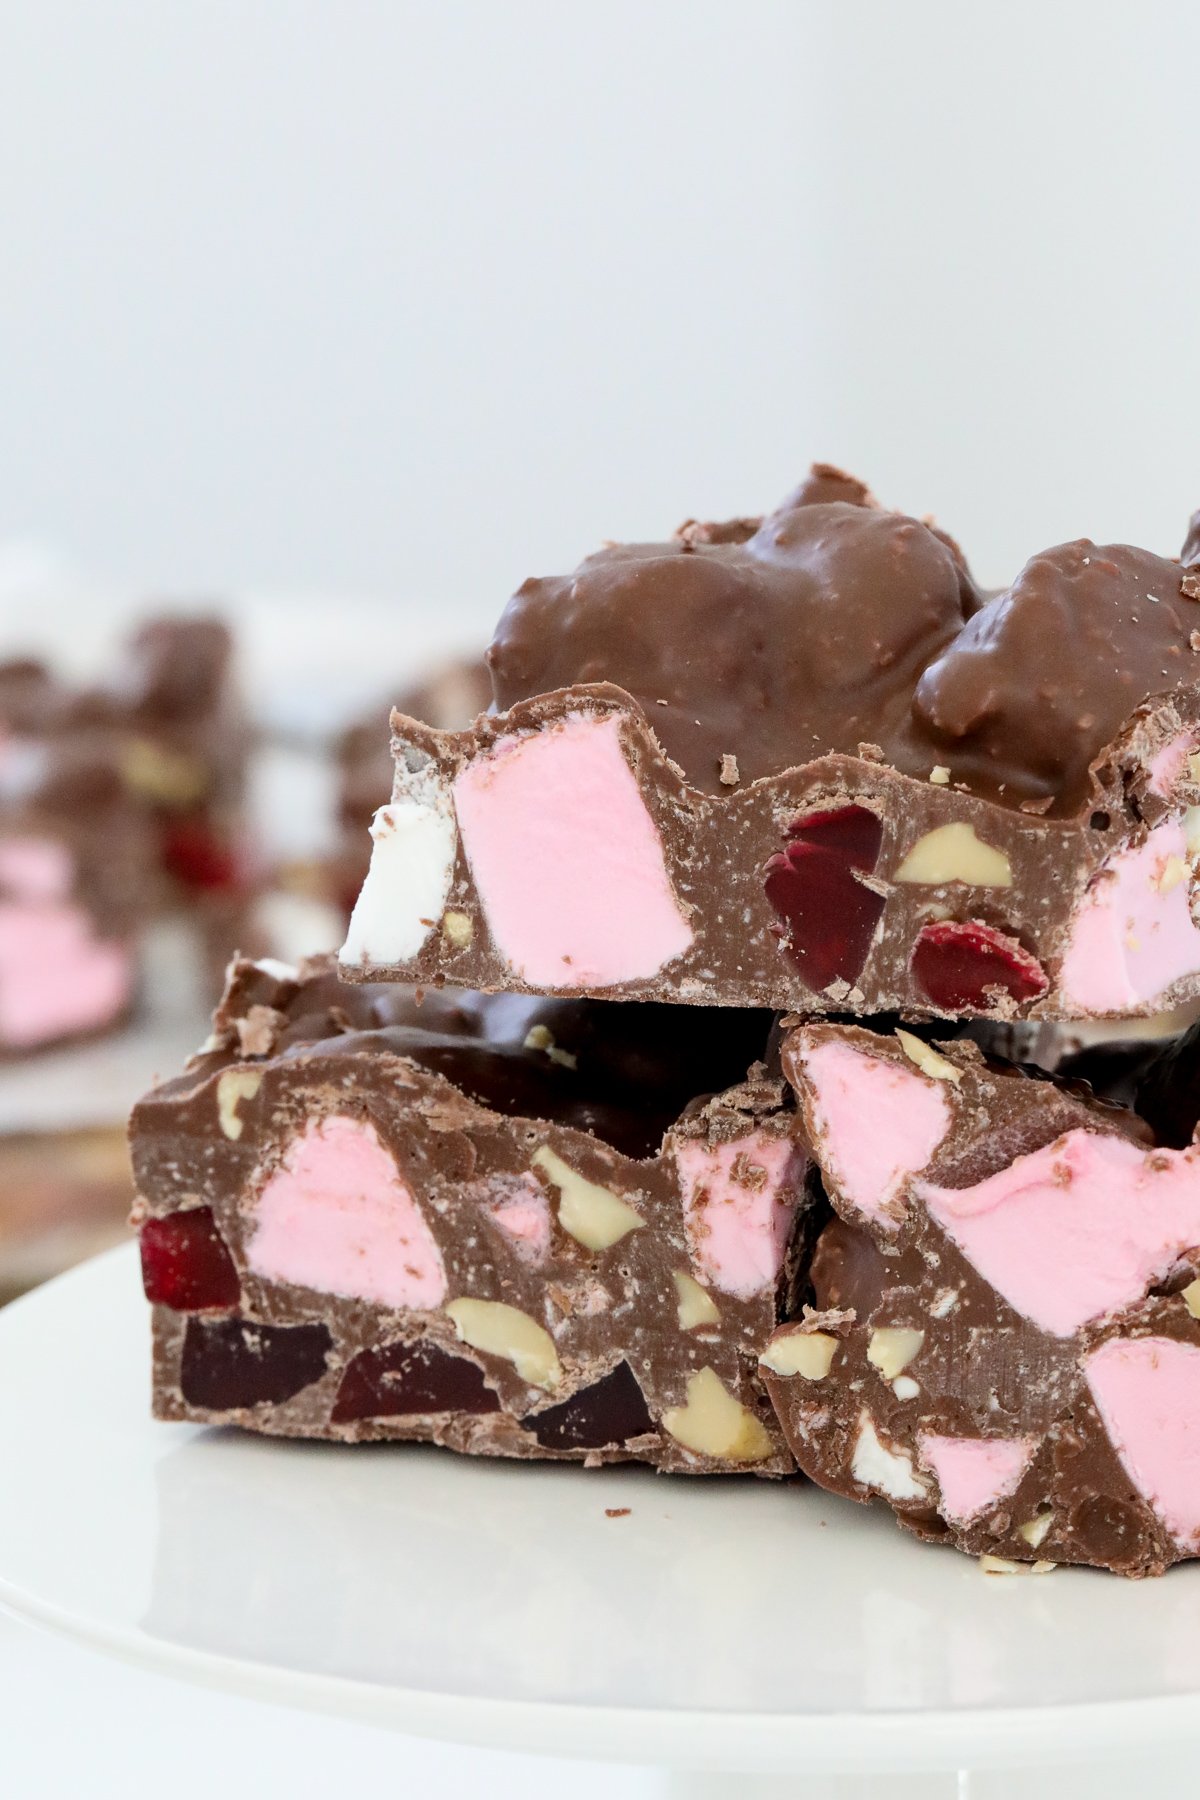 Pieces of chocolate rocky road on a cake stand.